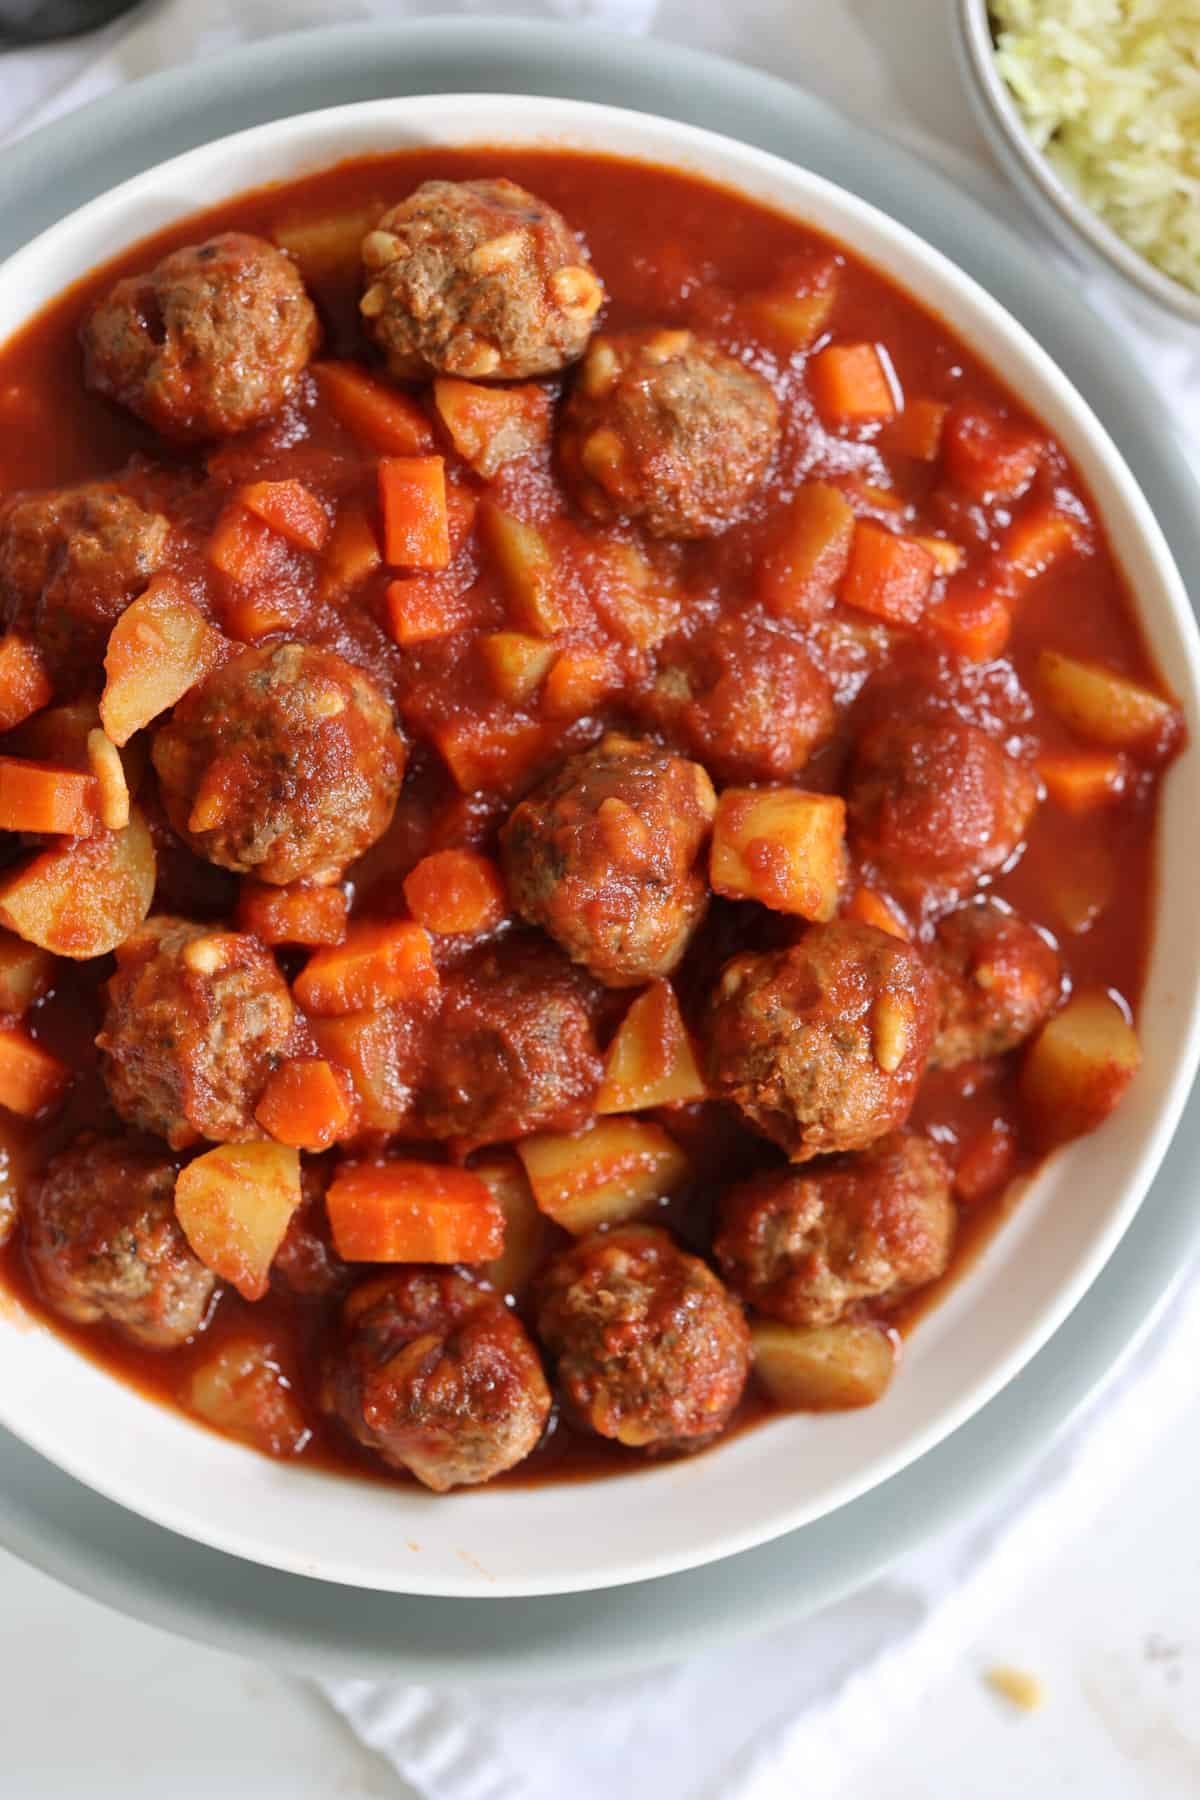 cooked lamb meatballs, potatoes and carrots in a white bowl